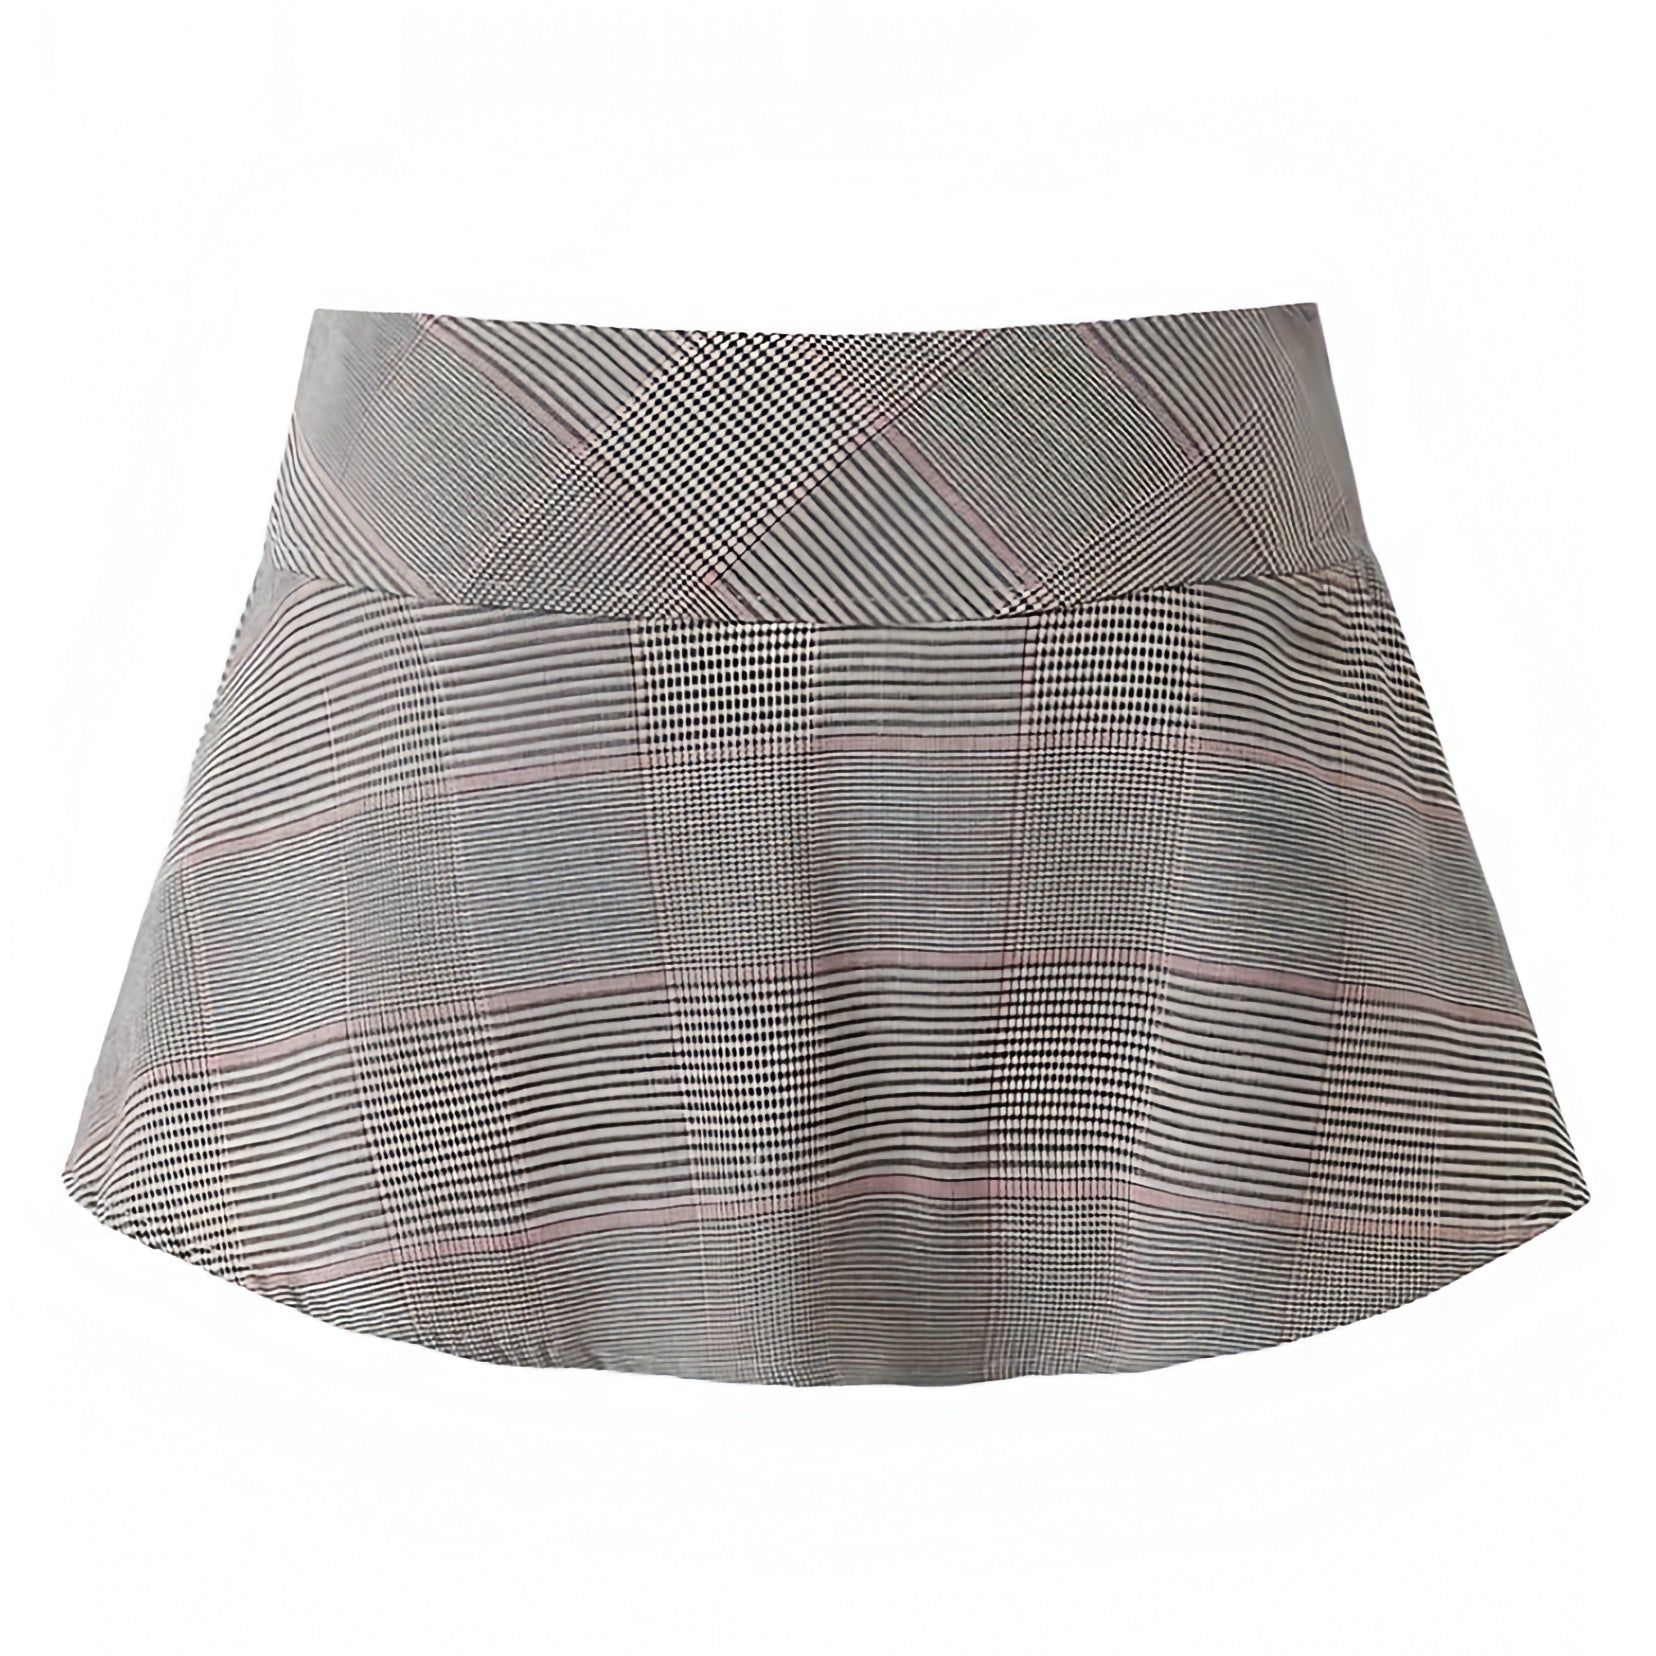 light-grey-gray-plaid-multi-color-slim-tight-fit-pleated-bow-mid-low-rise-waisted-fitted-waist-slit-short-mini-skirt-skort-with-shorts-women-ladies-chic-trendy-spring-2024-summer-casual-feminine-office-siren-90s-minimalist-coquette-blokette-preppy-school-academia-club-wear-night-out-sexy-party-korean-stockholm-style-zara-revolve-aritzia-brandy-melville-urban-outfitters